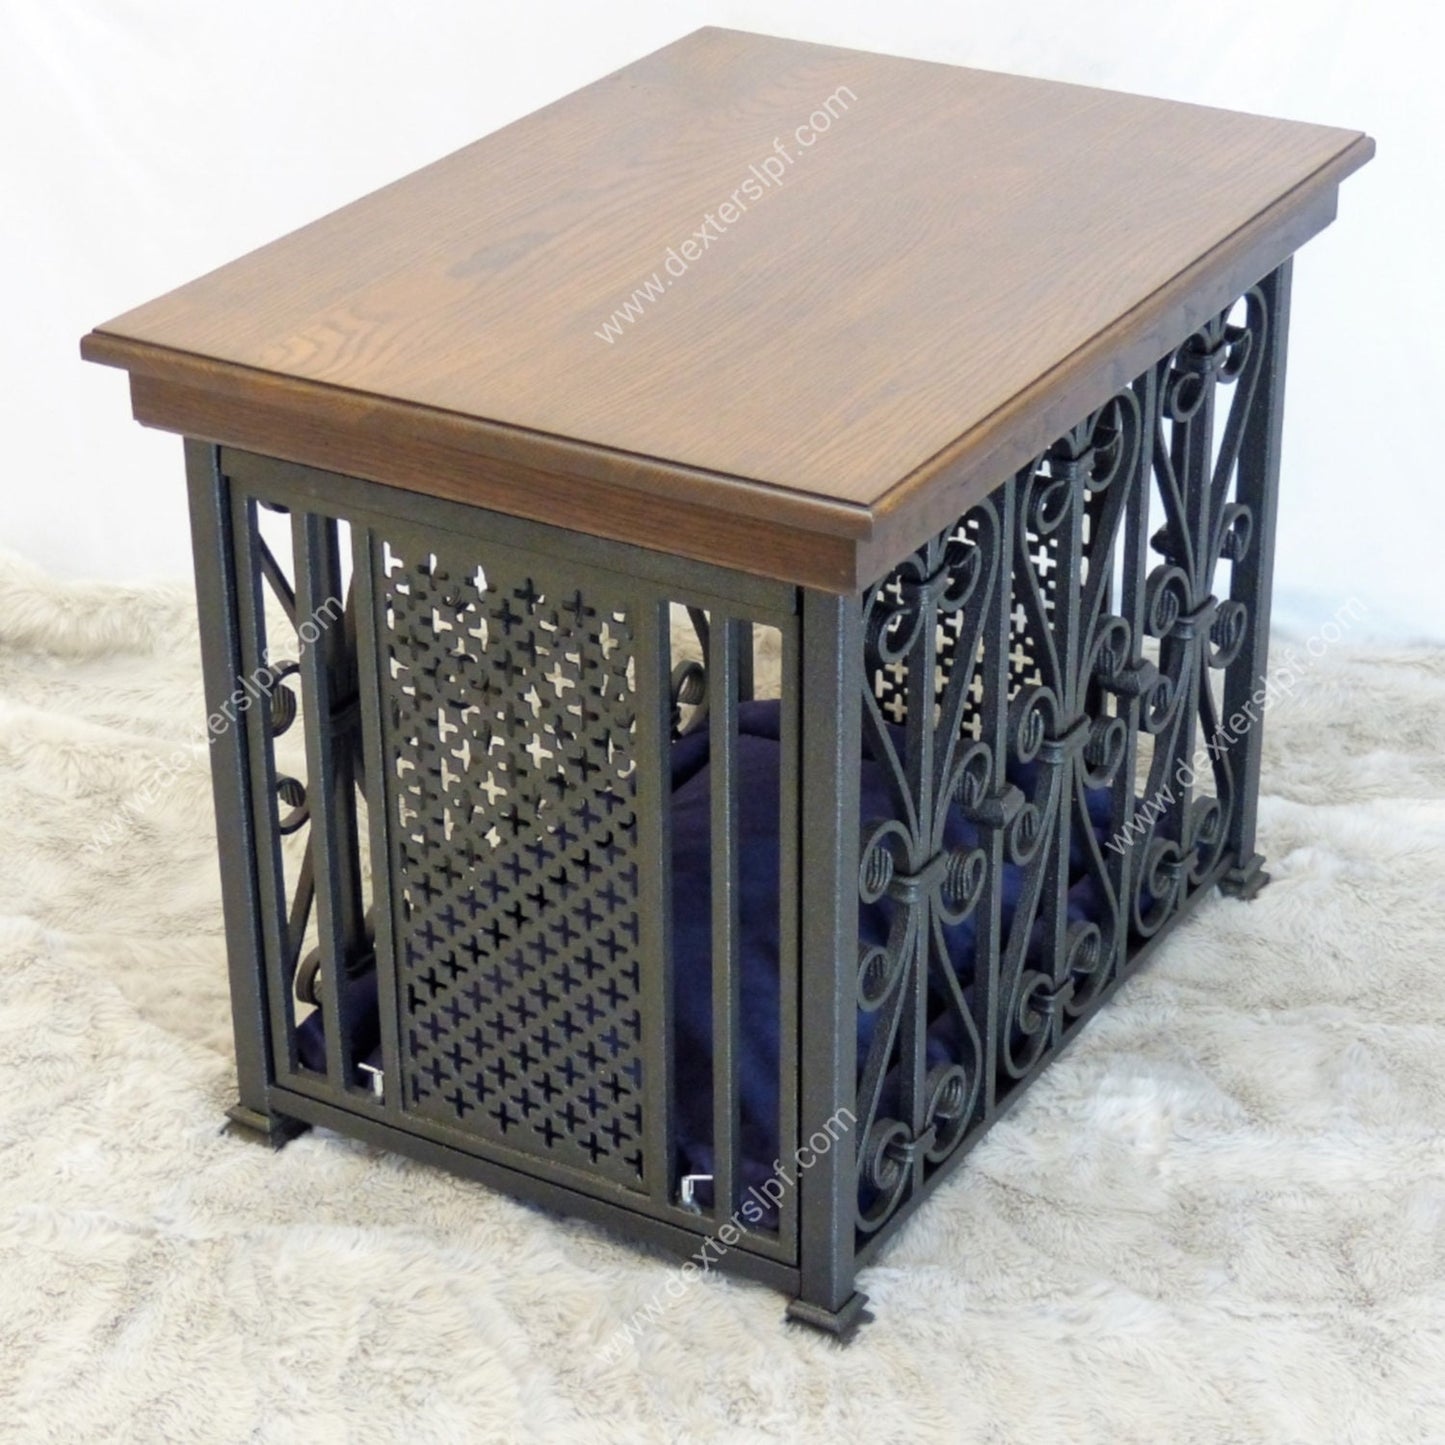 Bella Small Dog Crate, Dog Crate End Table, Dog Kennel Furniture, Dog Kennel